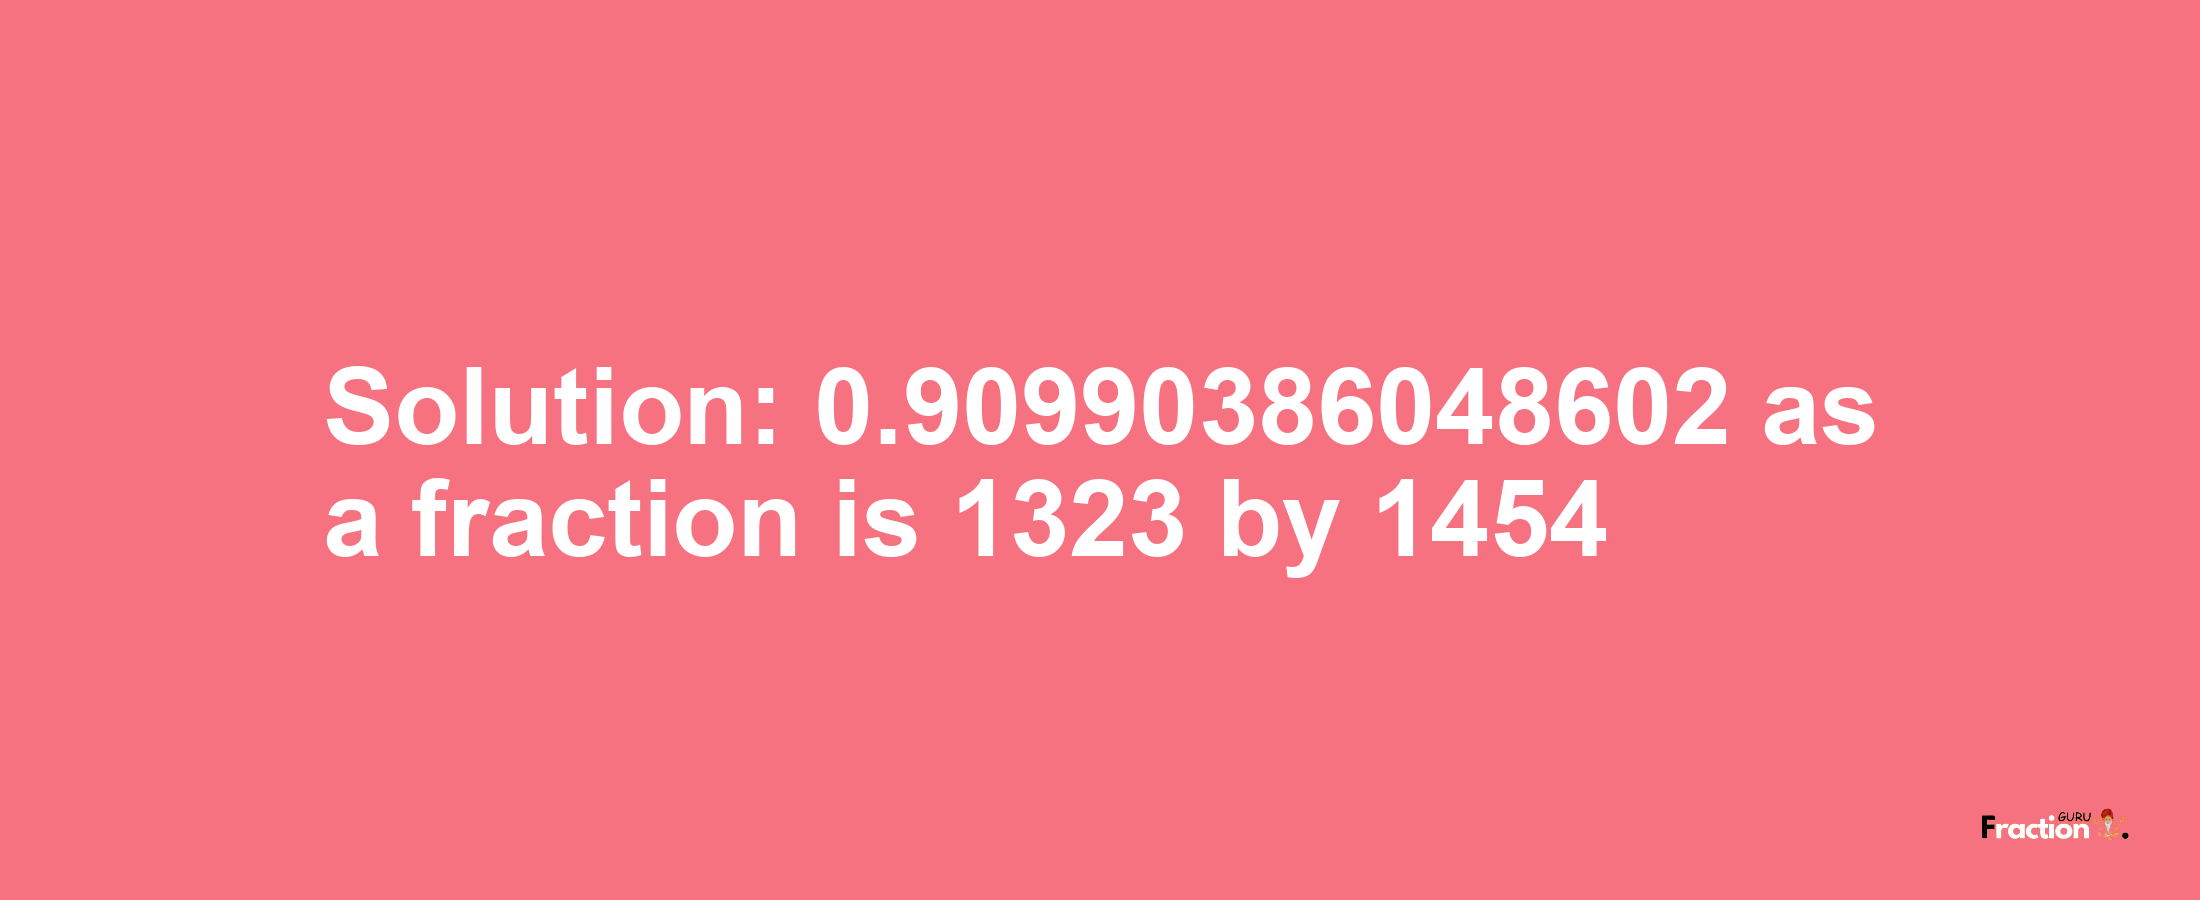 Solution:0.90990386048602 as a fraction is 1323/1454